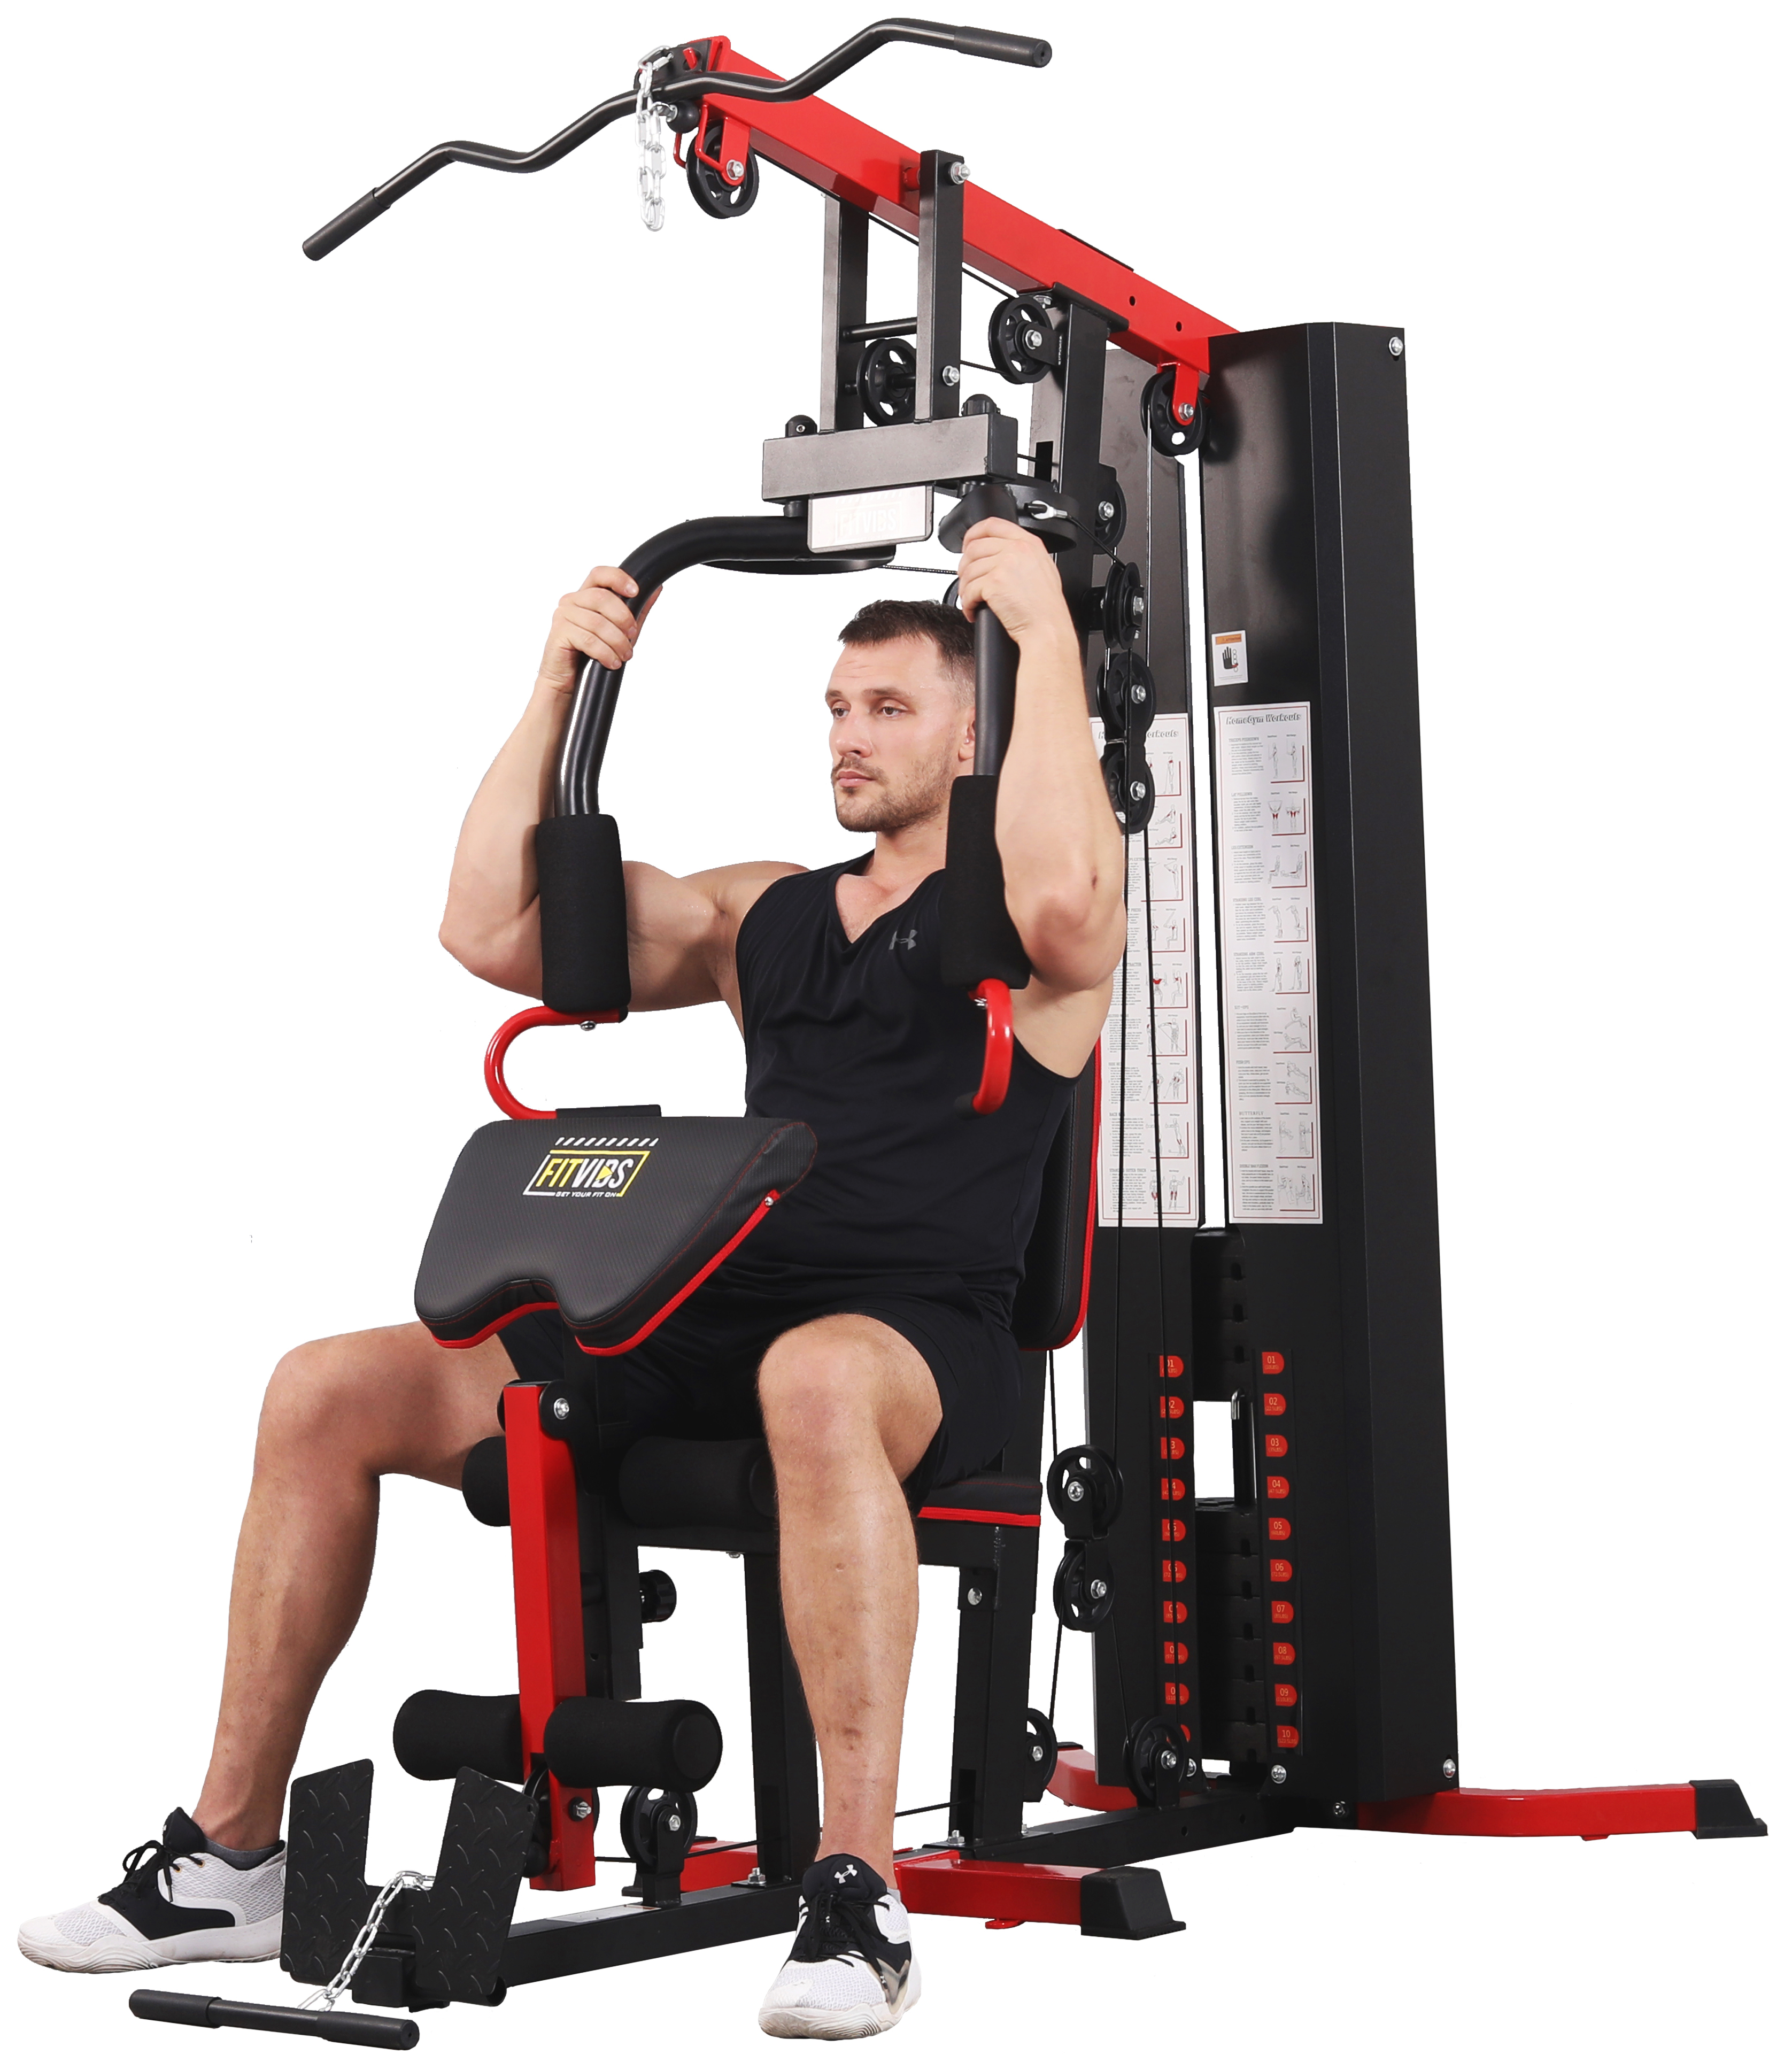 Fitvids LX750 Home Gym System Workout Station with 330 Lbs of Resistance, 122.5 Lbs Weight Stack, One Station, Comes with Installation Instruction Video, Ships in 5 Boxes - image 3 of 13